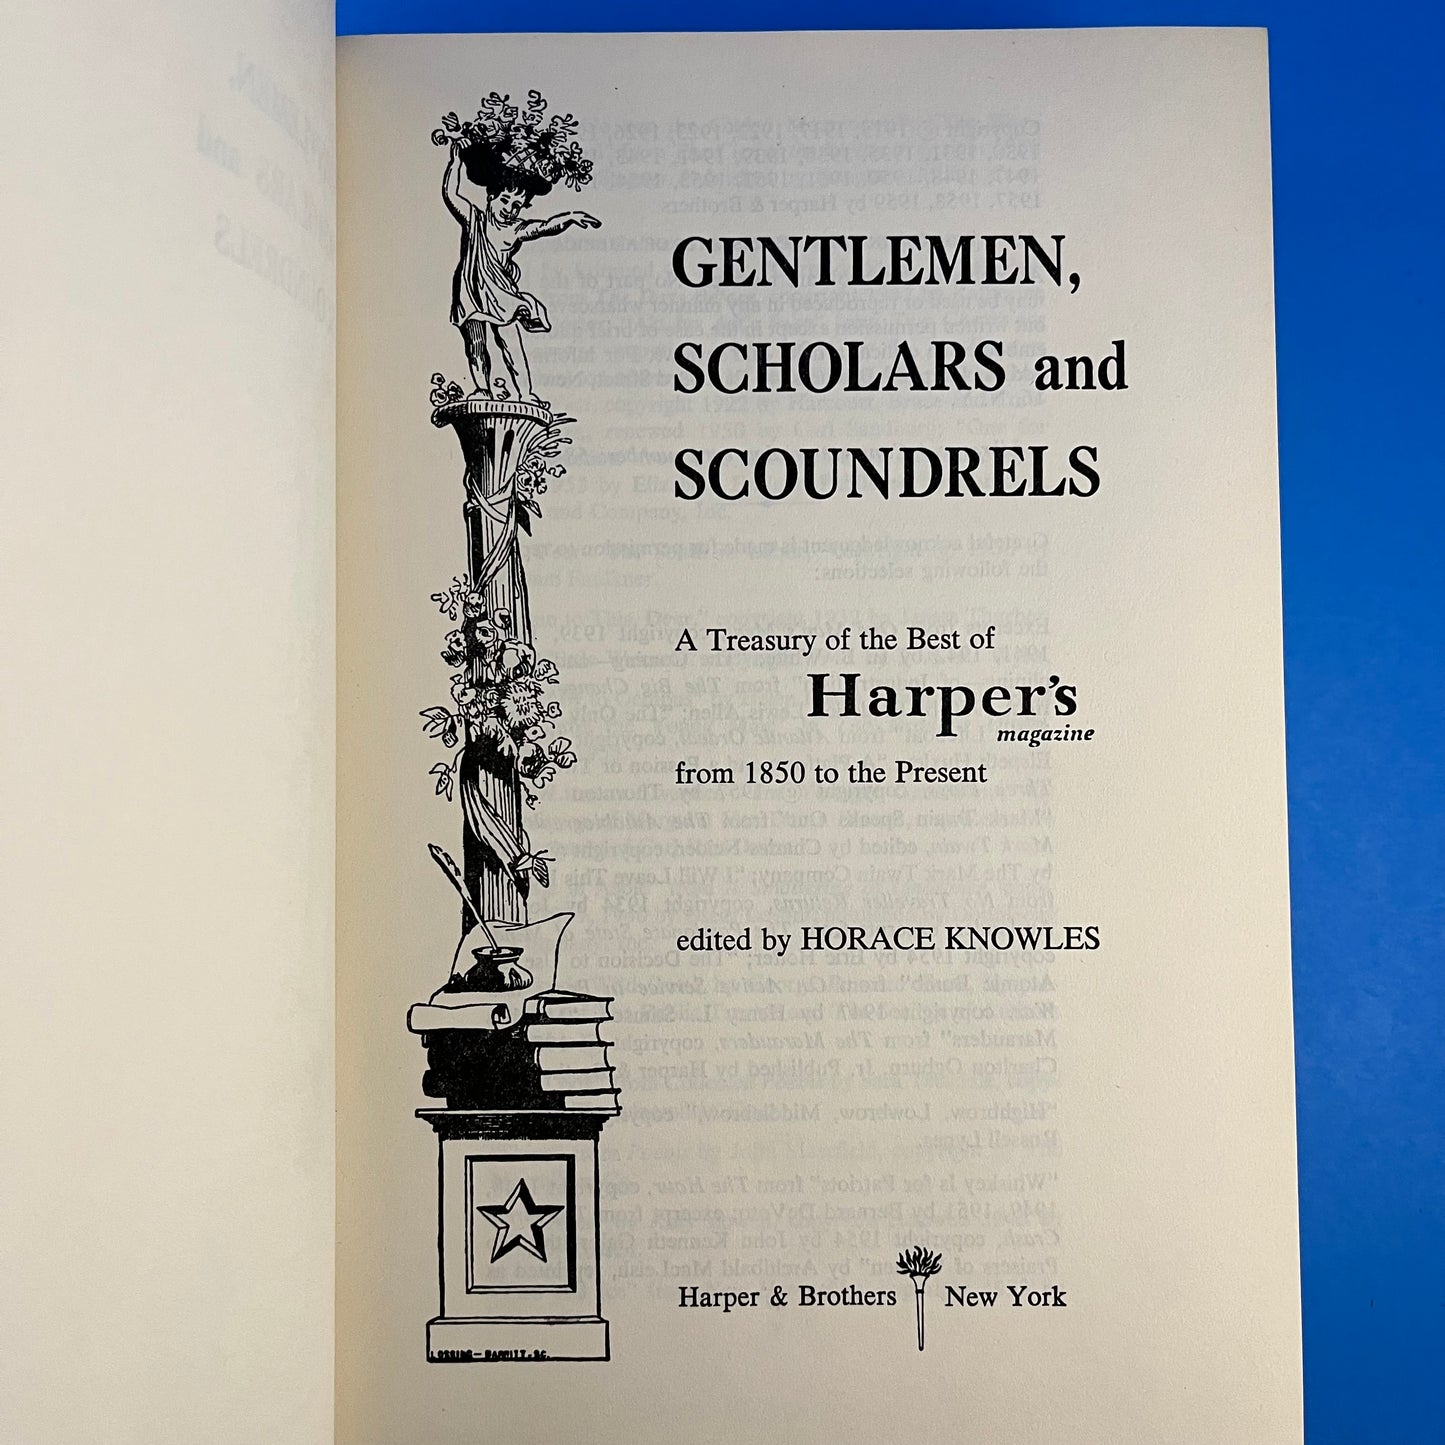 Gentlemen, Scholars and Scoundrels: A Treasury of the Best of Harper's Magazine from 1850 to the Present